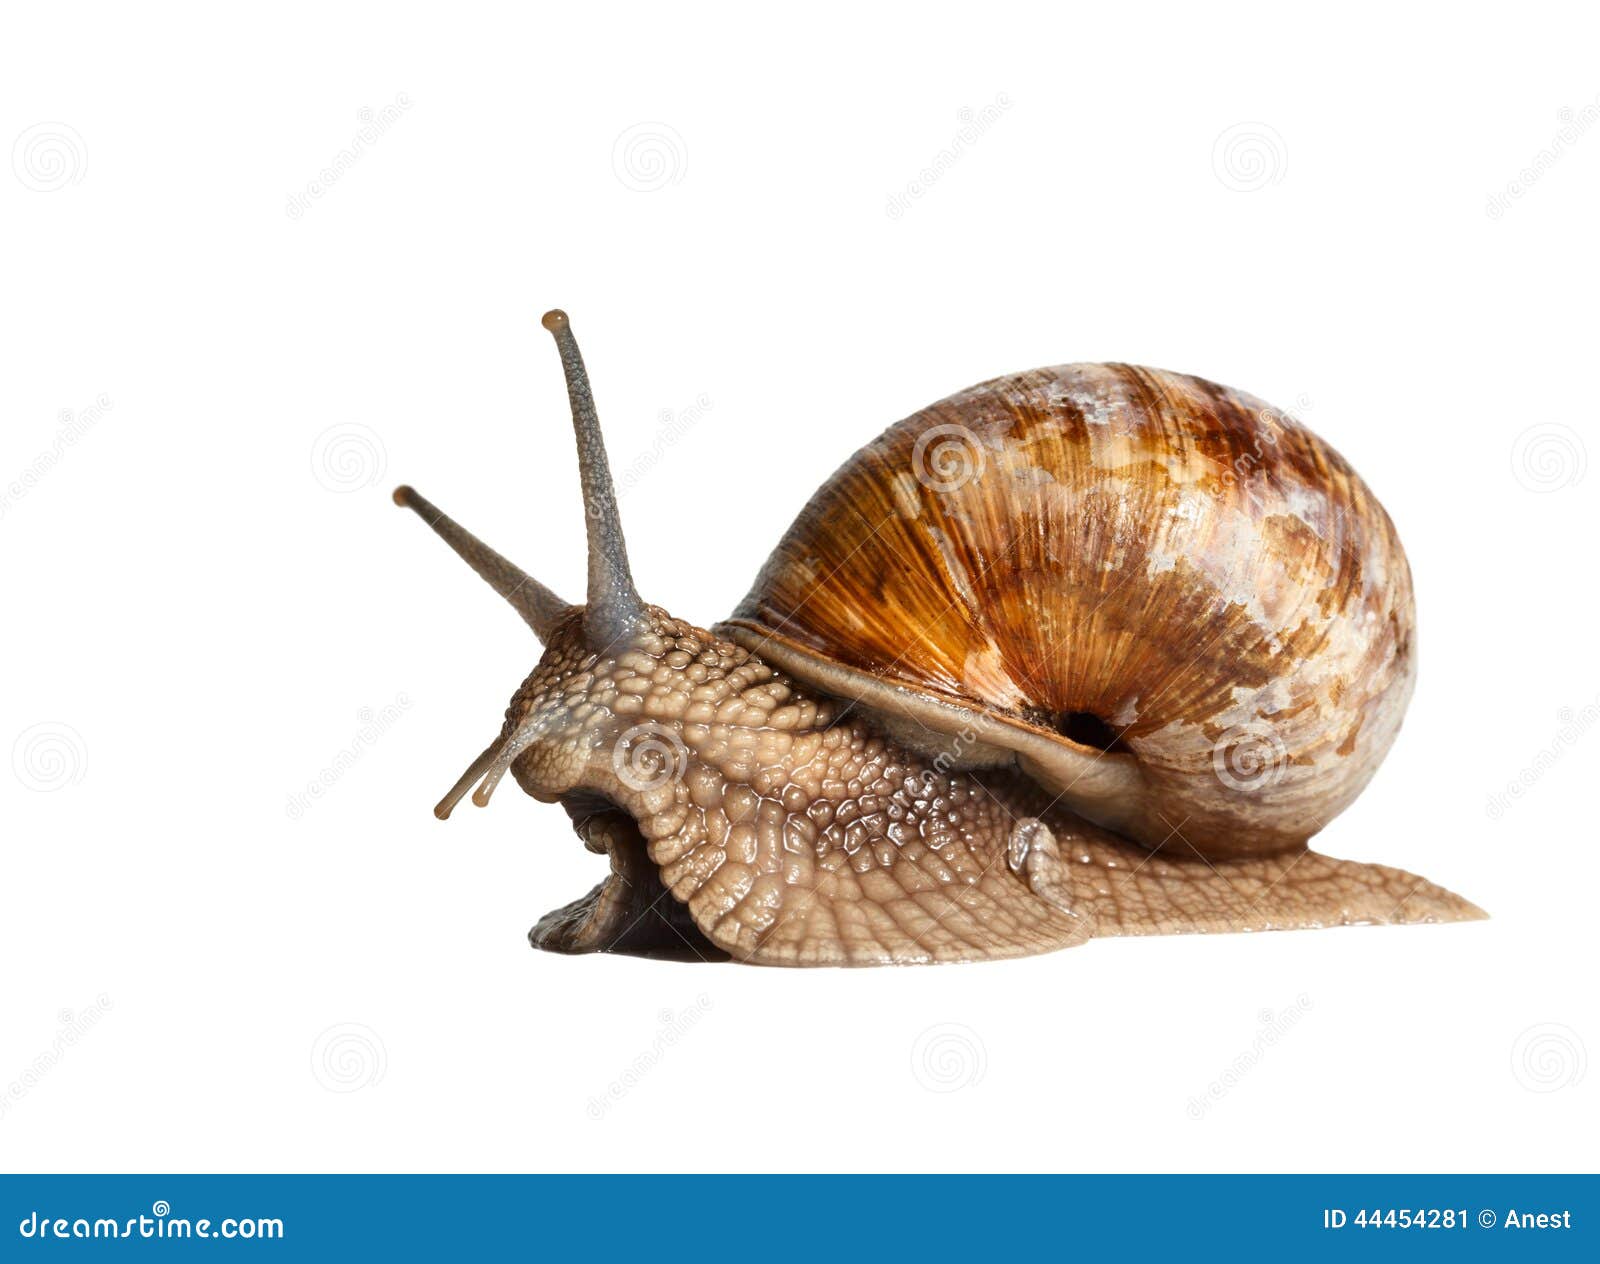 Garden snail side view. Close-up low angle view of Roman snail (Helix pomatia) isolated on white background